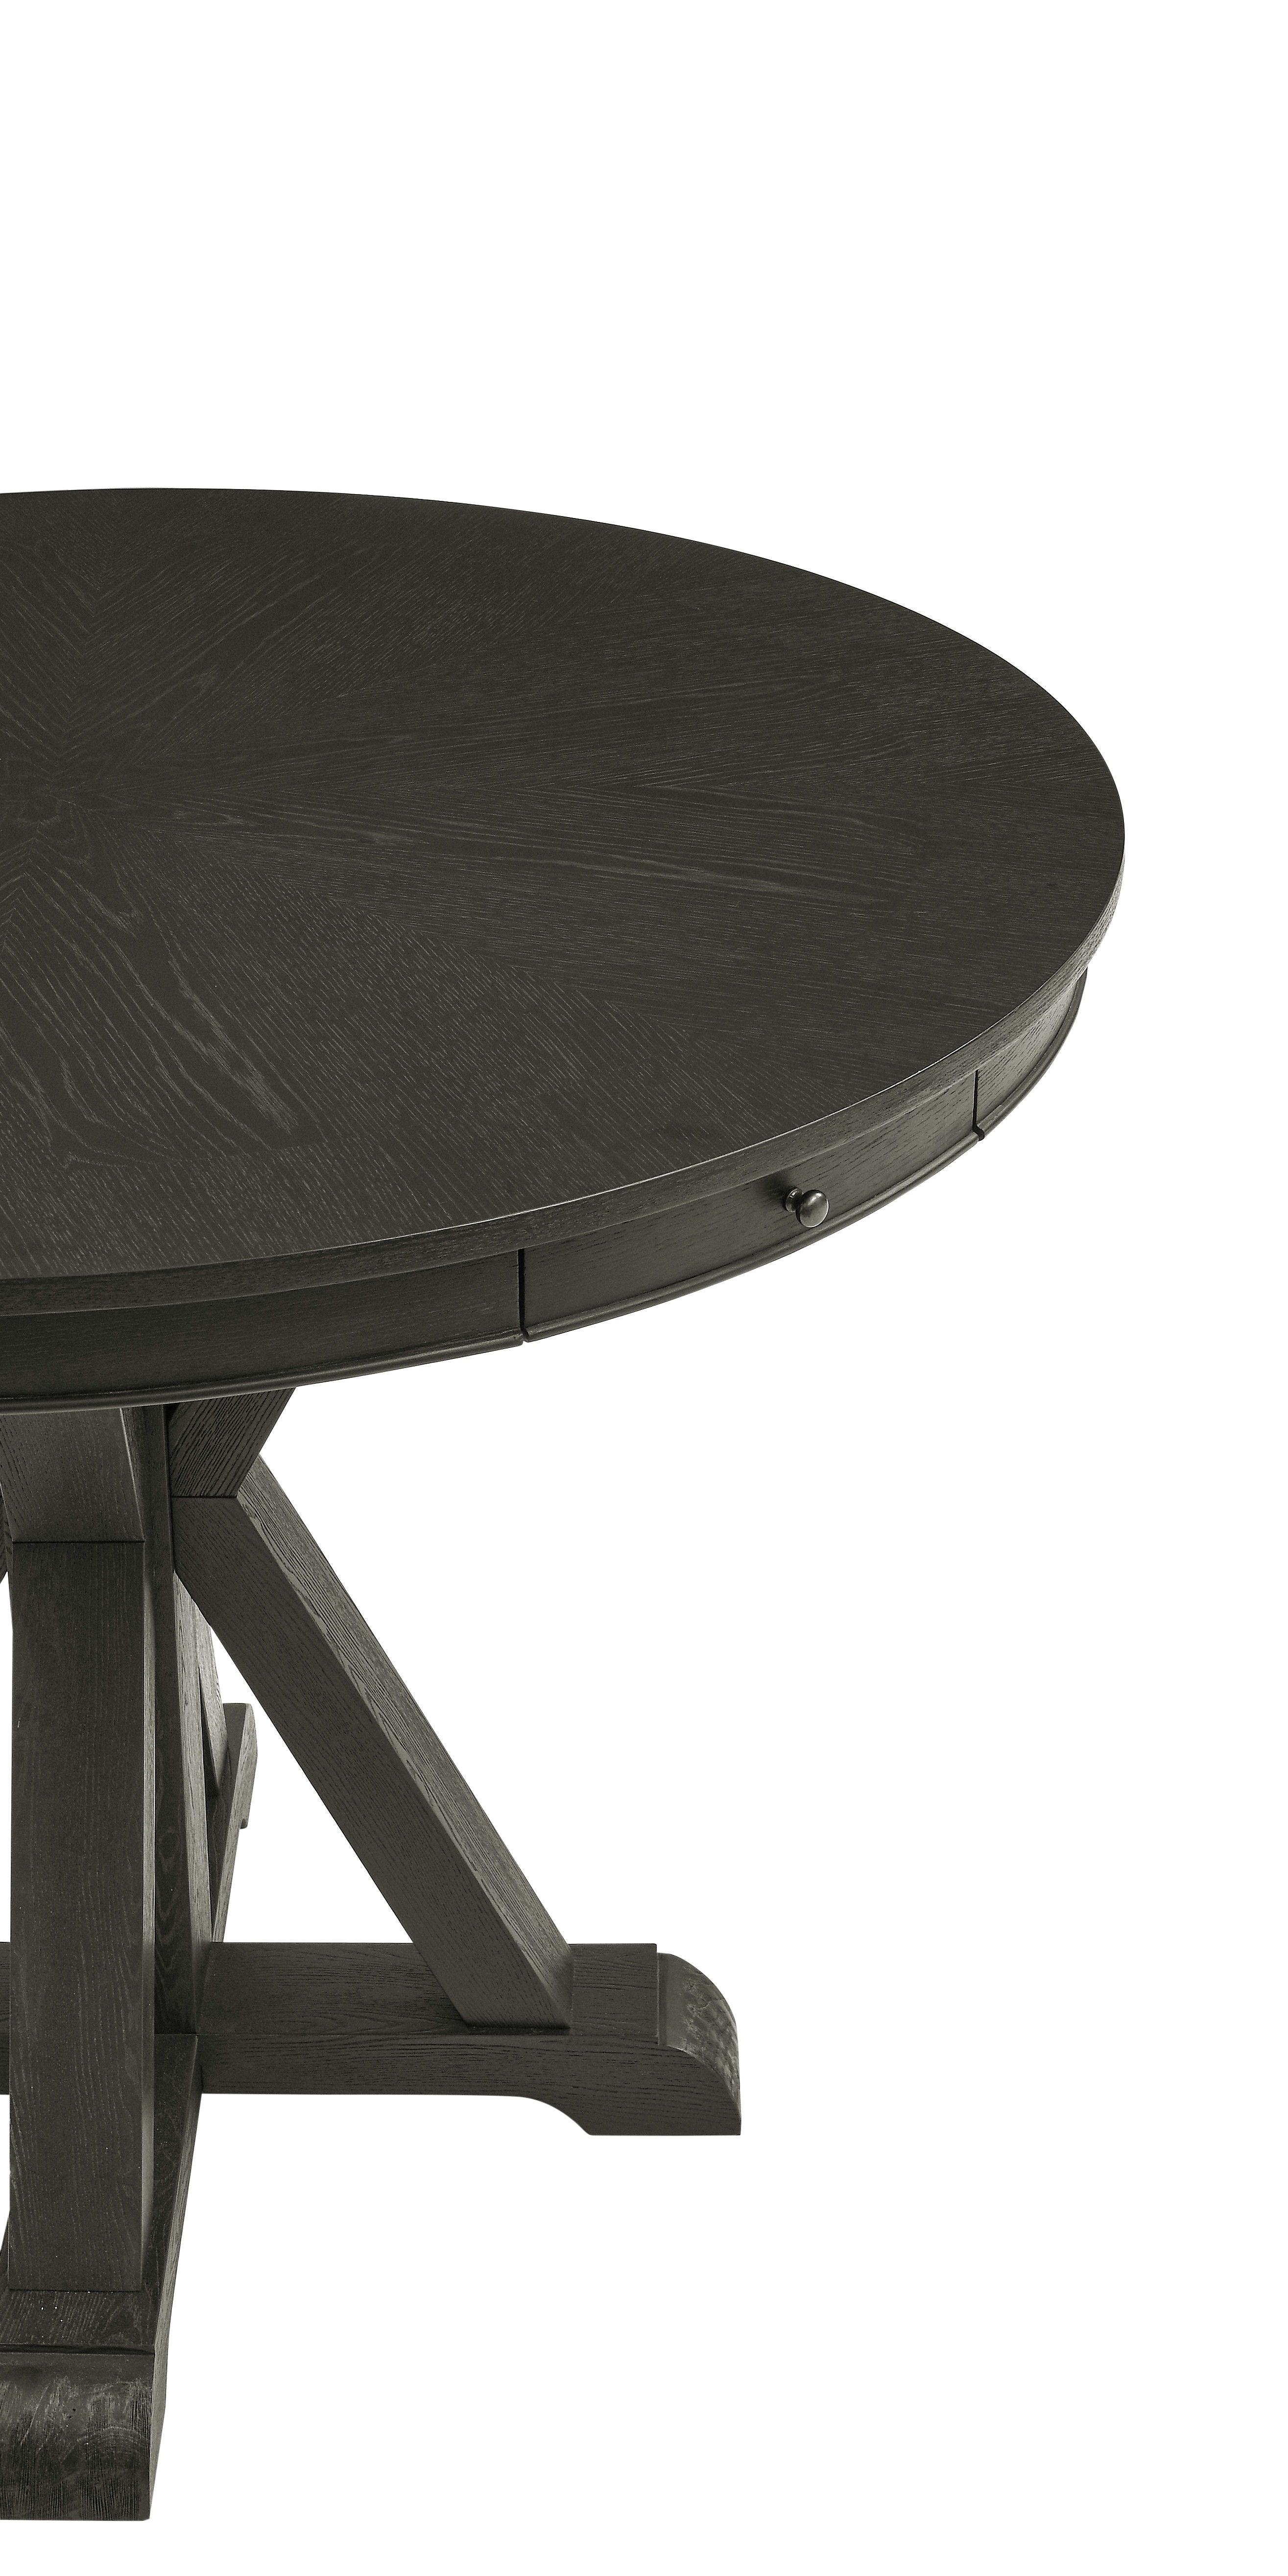 Steve Silver Furniture - Rylie - Counter Table - Black - 5th Avenue Furniture